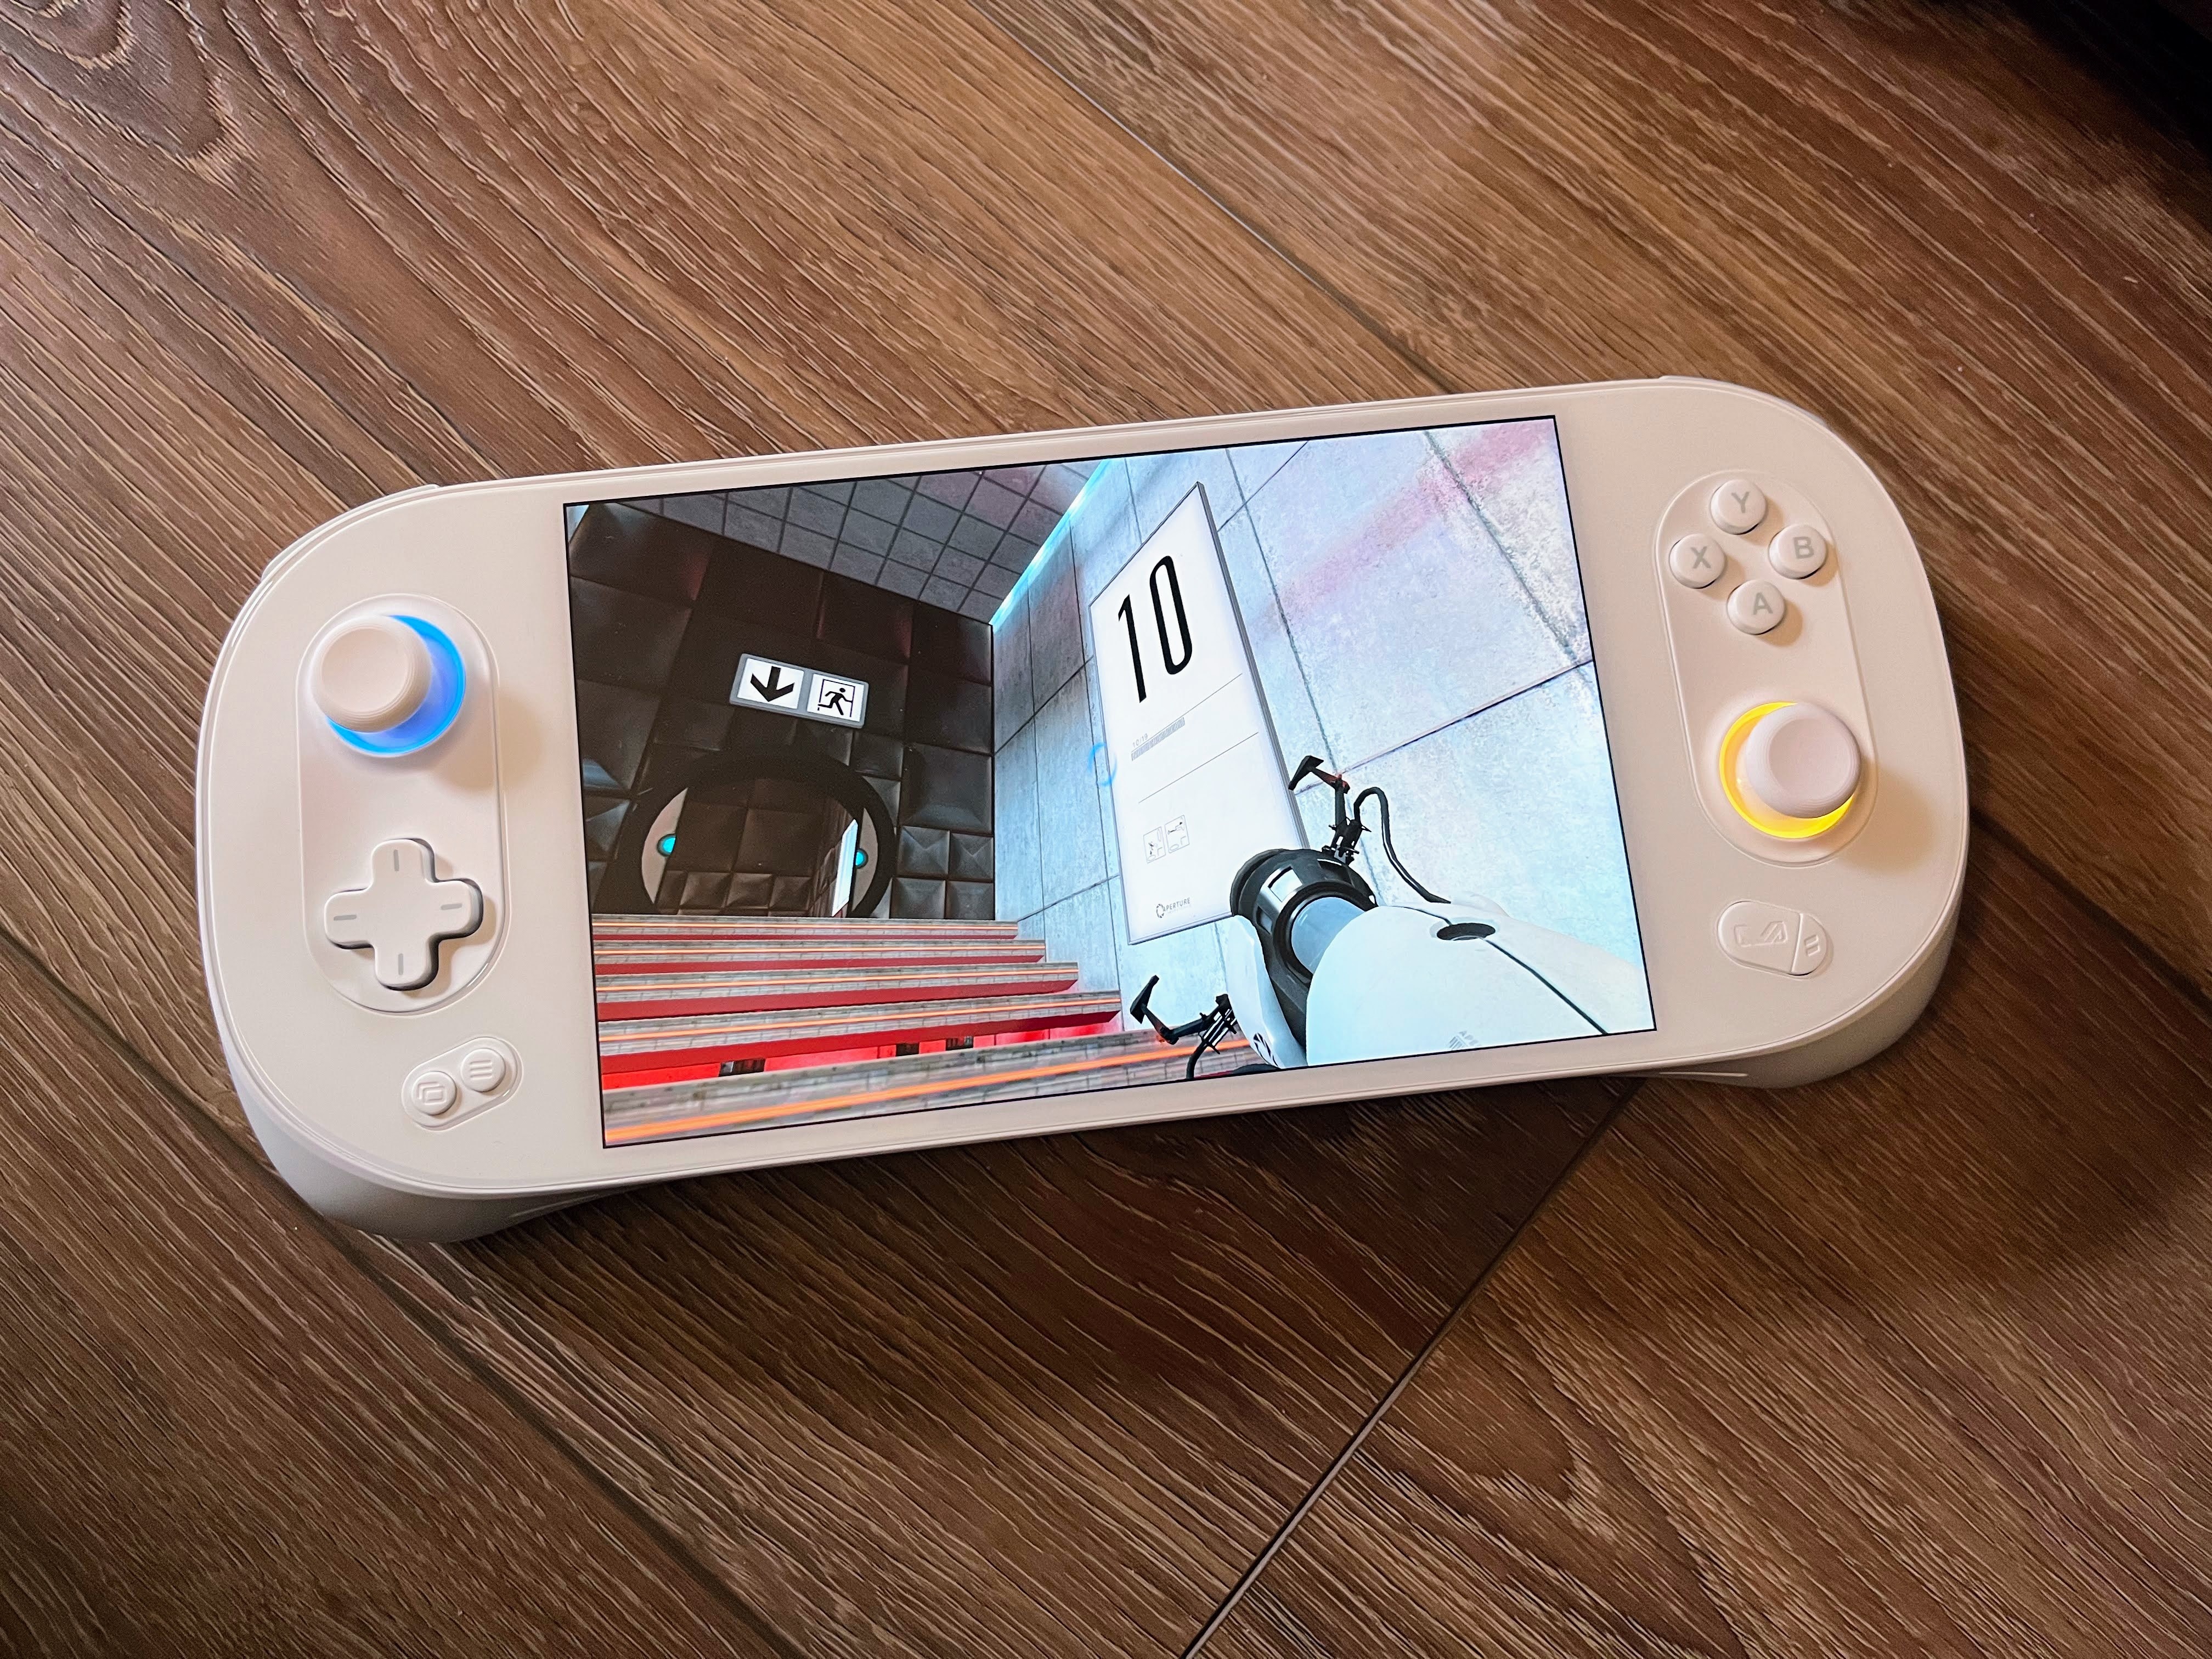 New AYA NEO 2S model teased with gaming handheld first and OcuLink